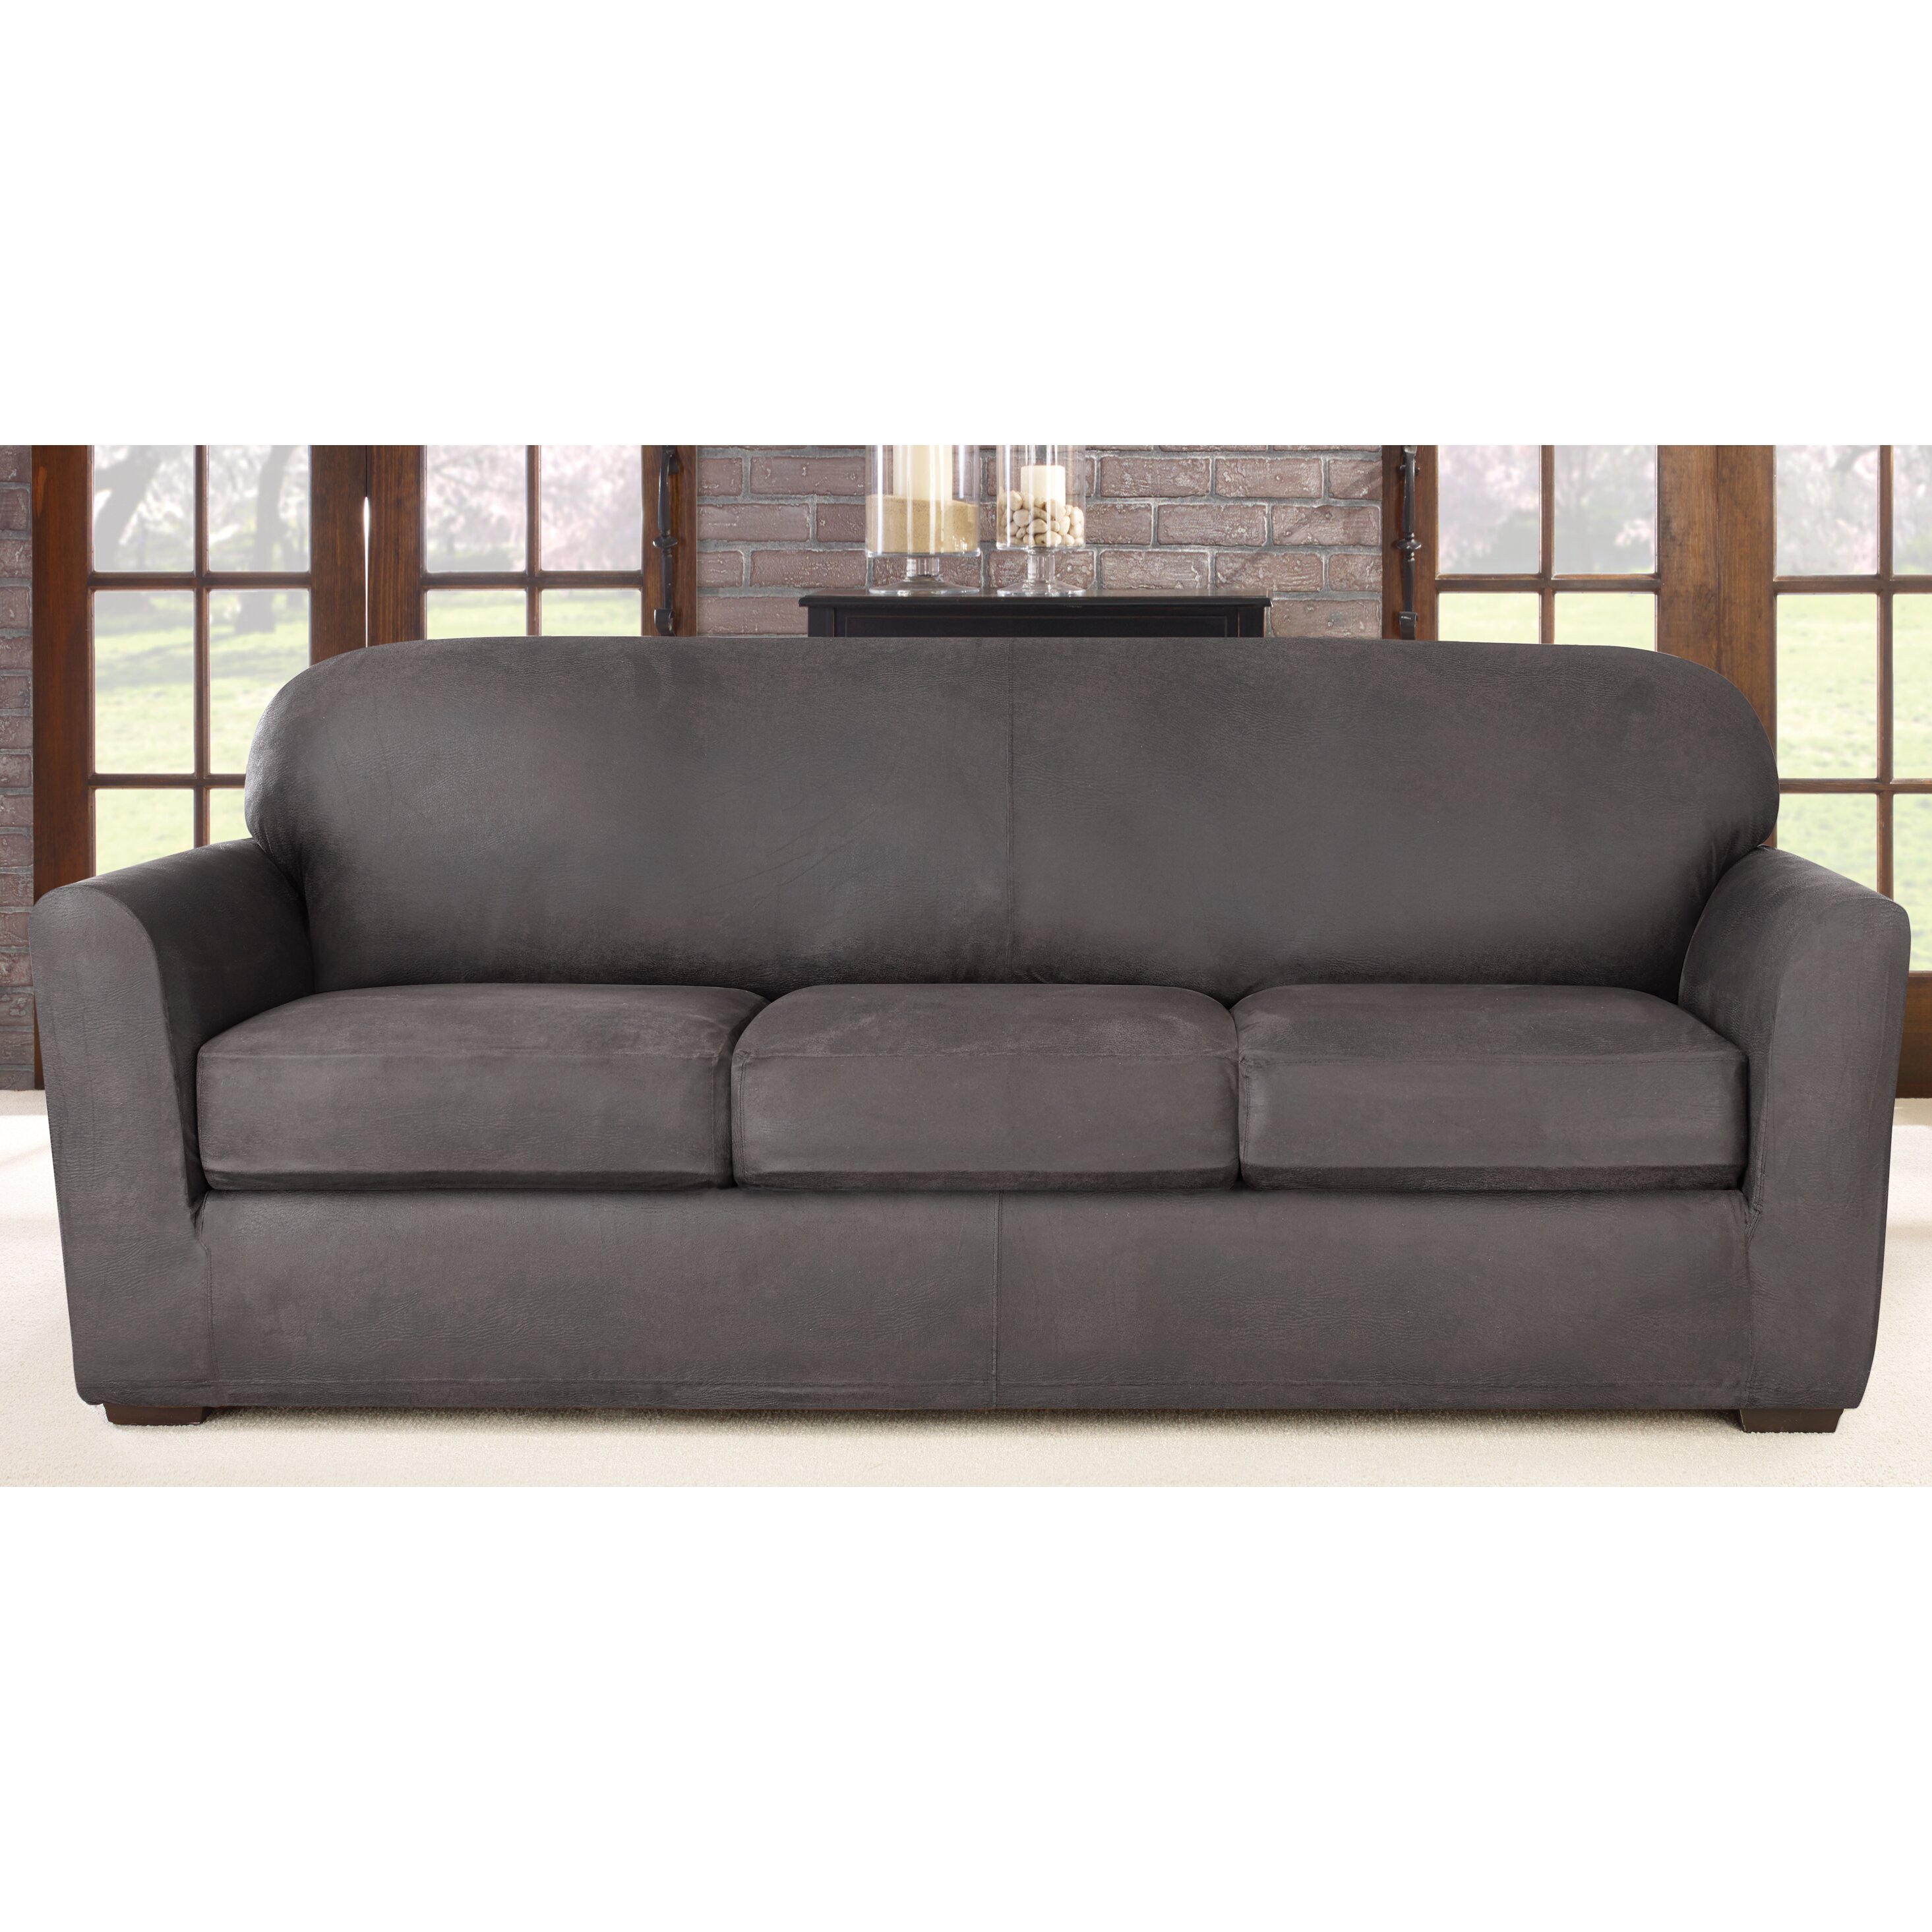 Sure Fit Ultimate Stretch Sofa Slipcover & Reviews | Wayfair